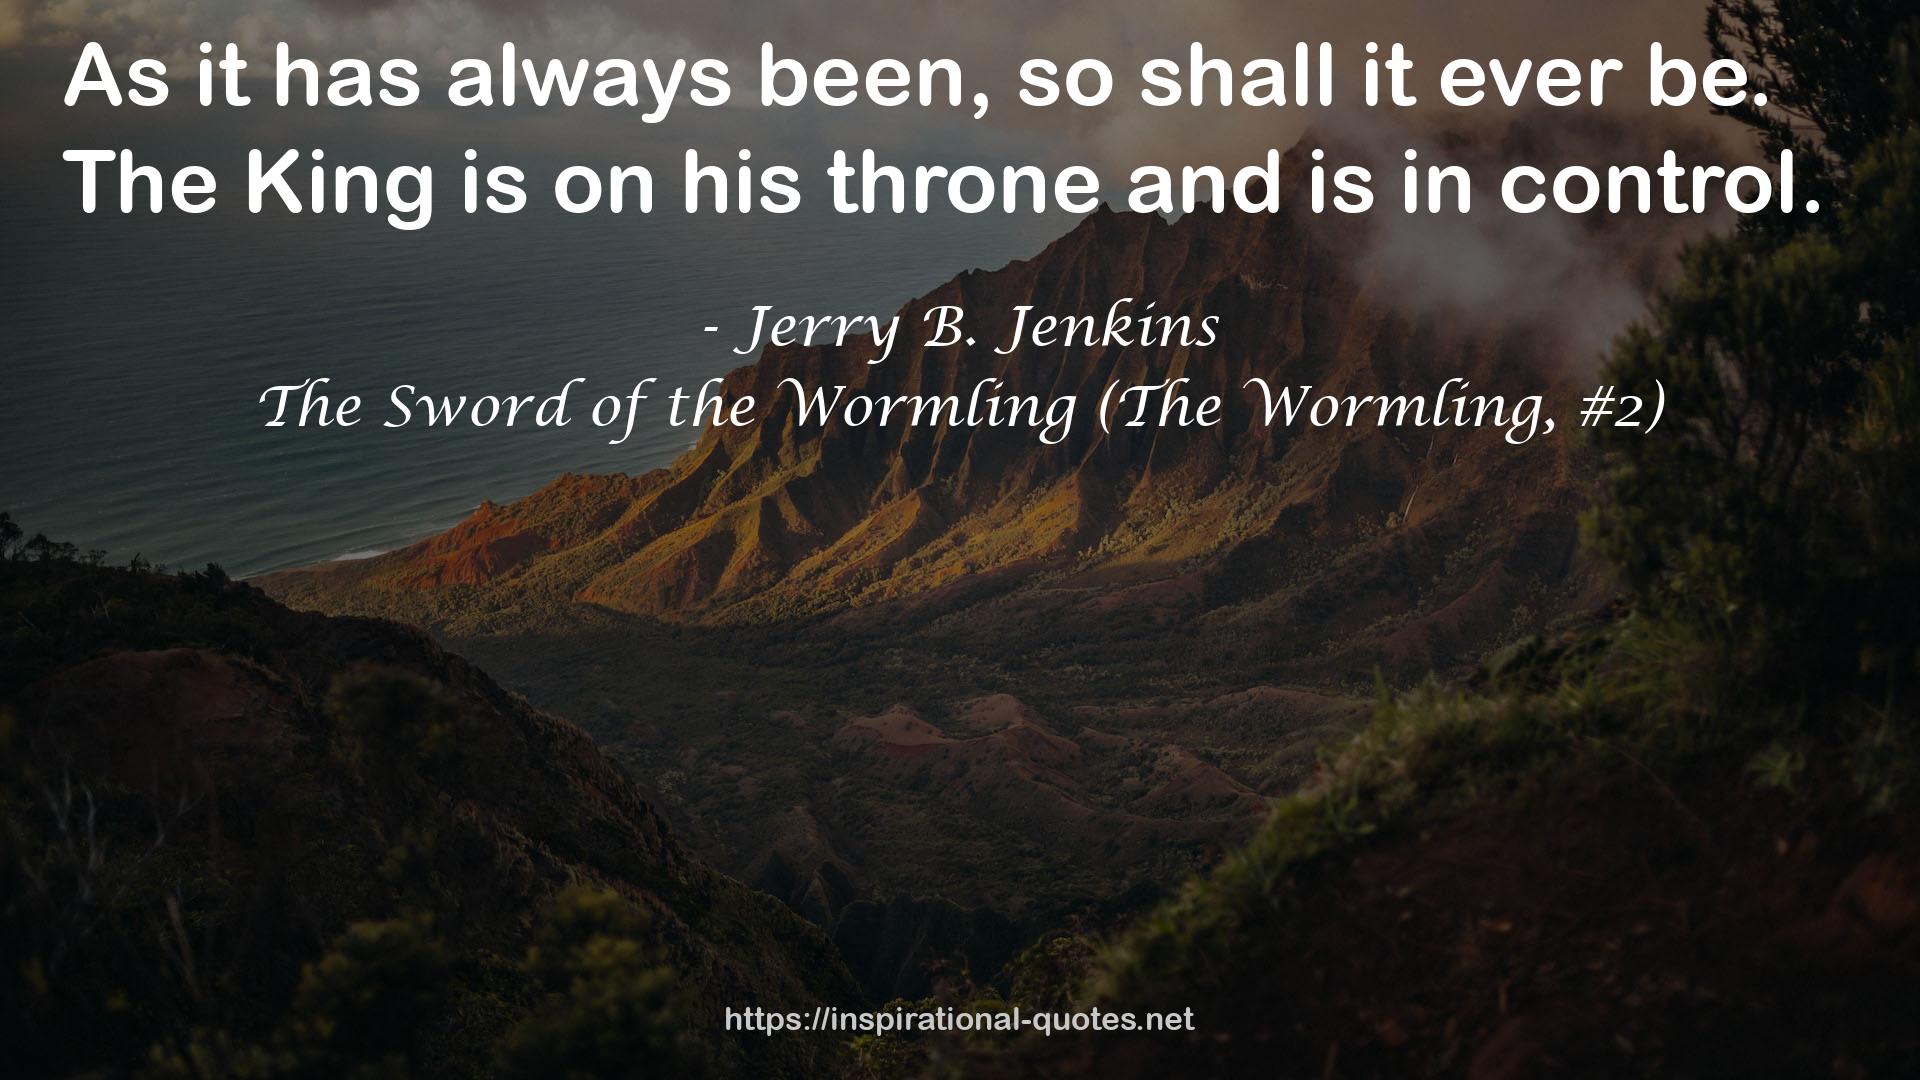 The Sword of the Wormling (The Wormling, #2) QUOTES